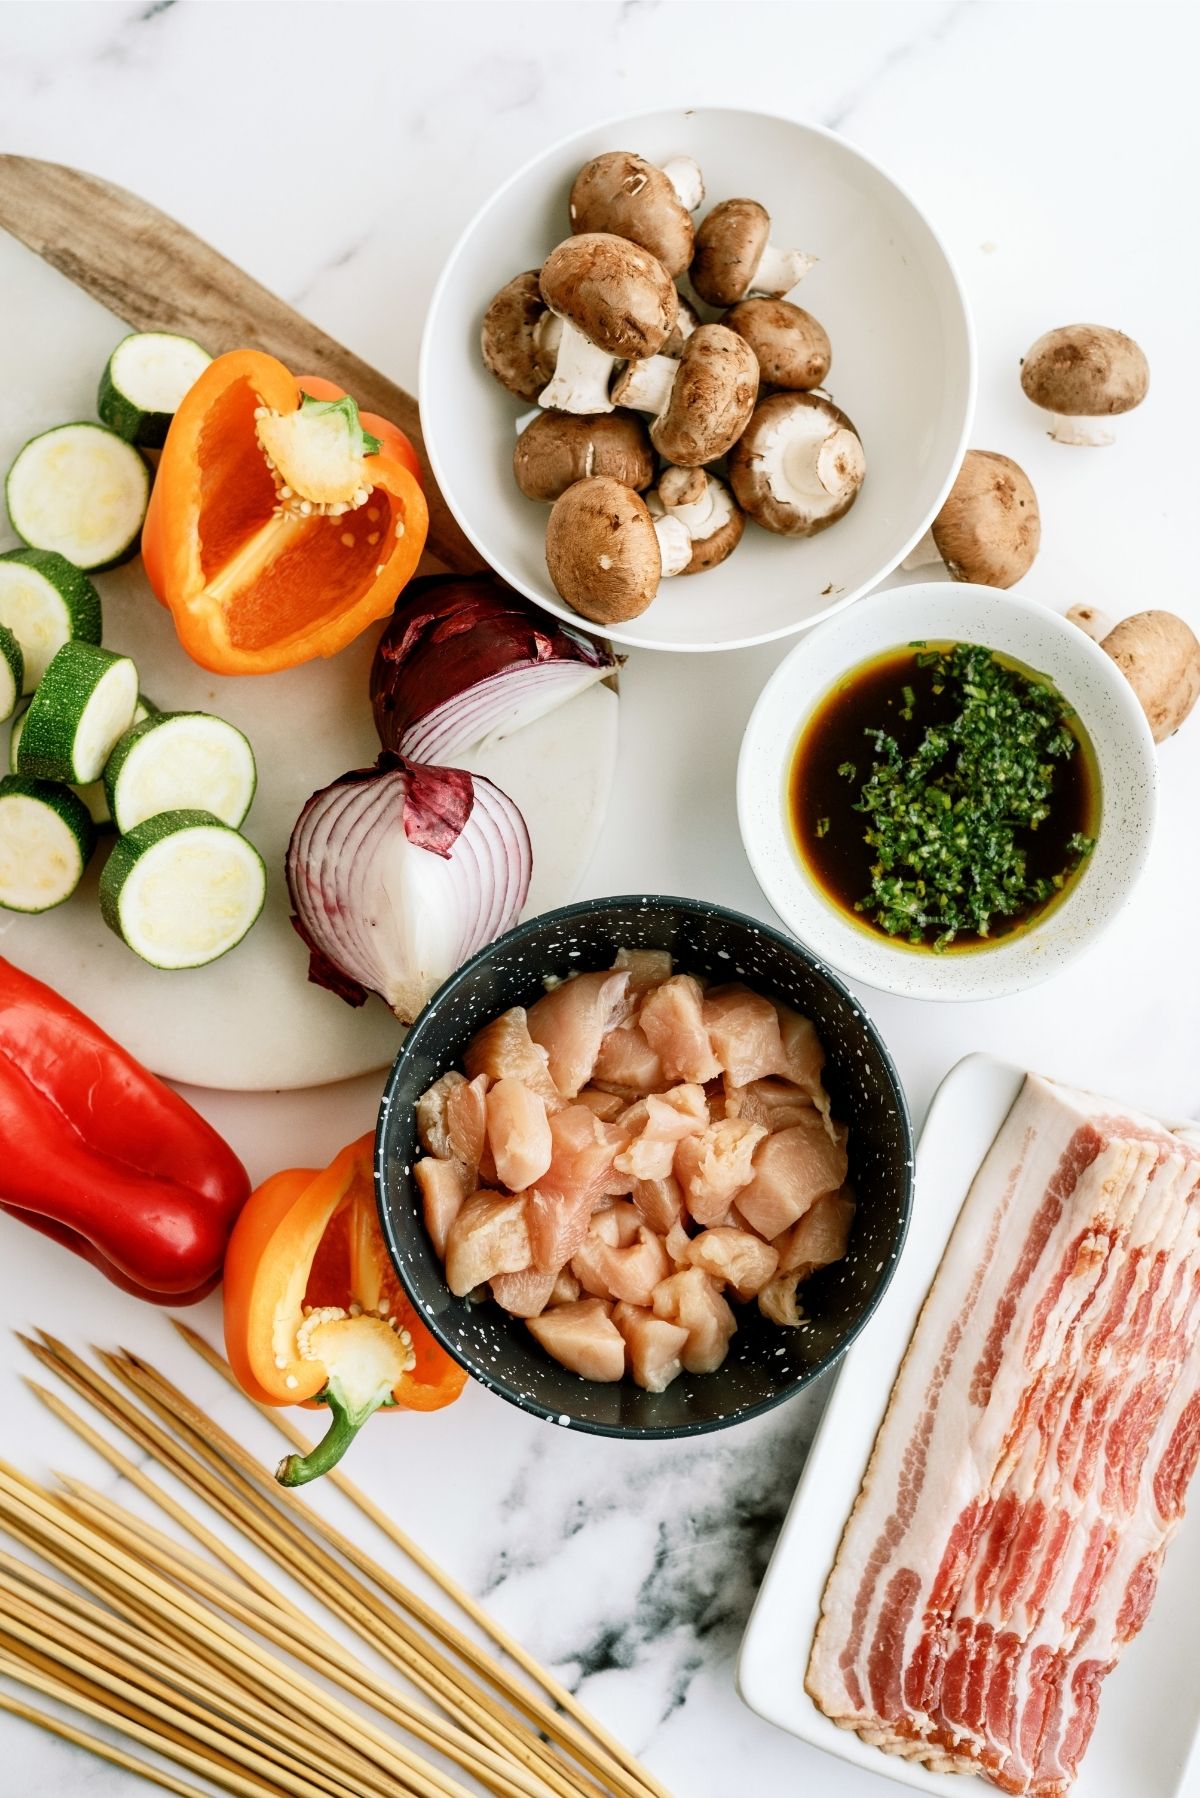 Ingredients for Chicken and Bacon Shish Kabobs Recipe